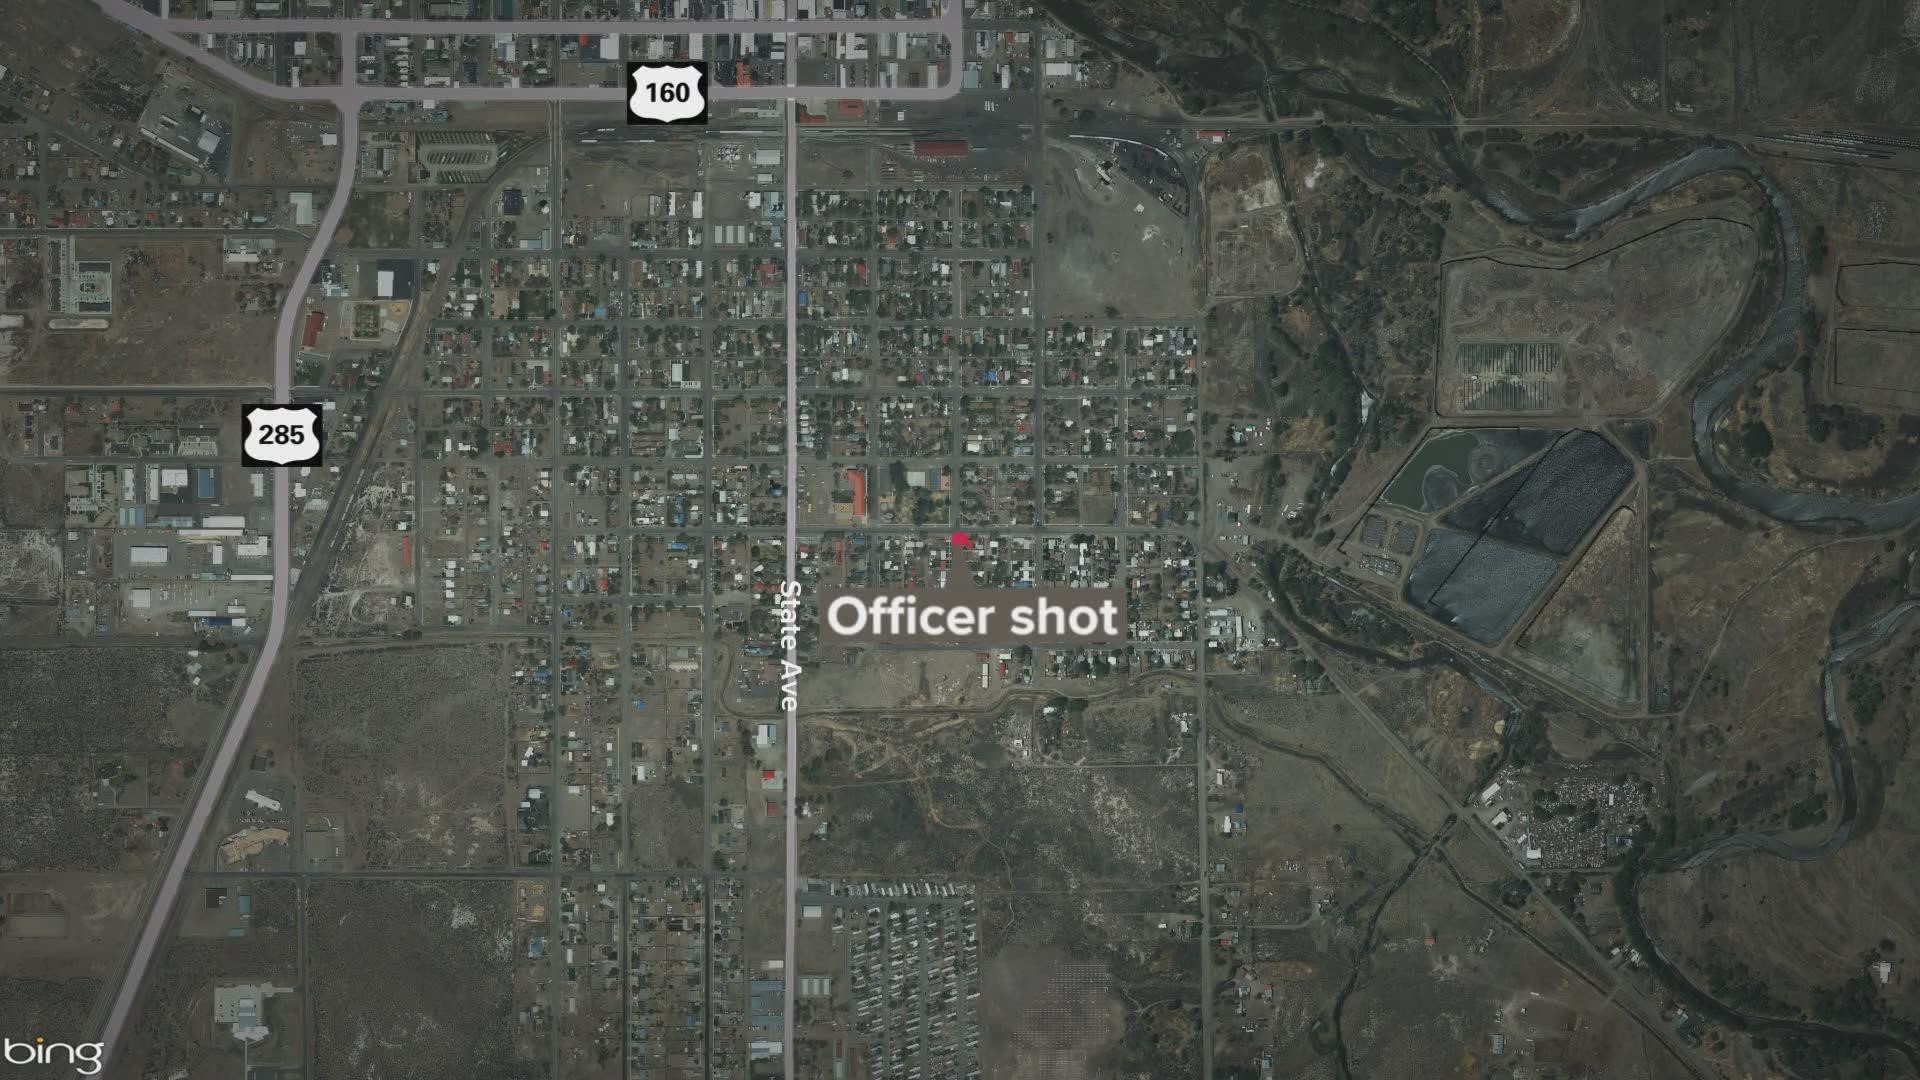 A juvenile suspect is in custody after the officer and one other victim were shot Thursday.